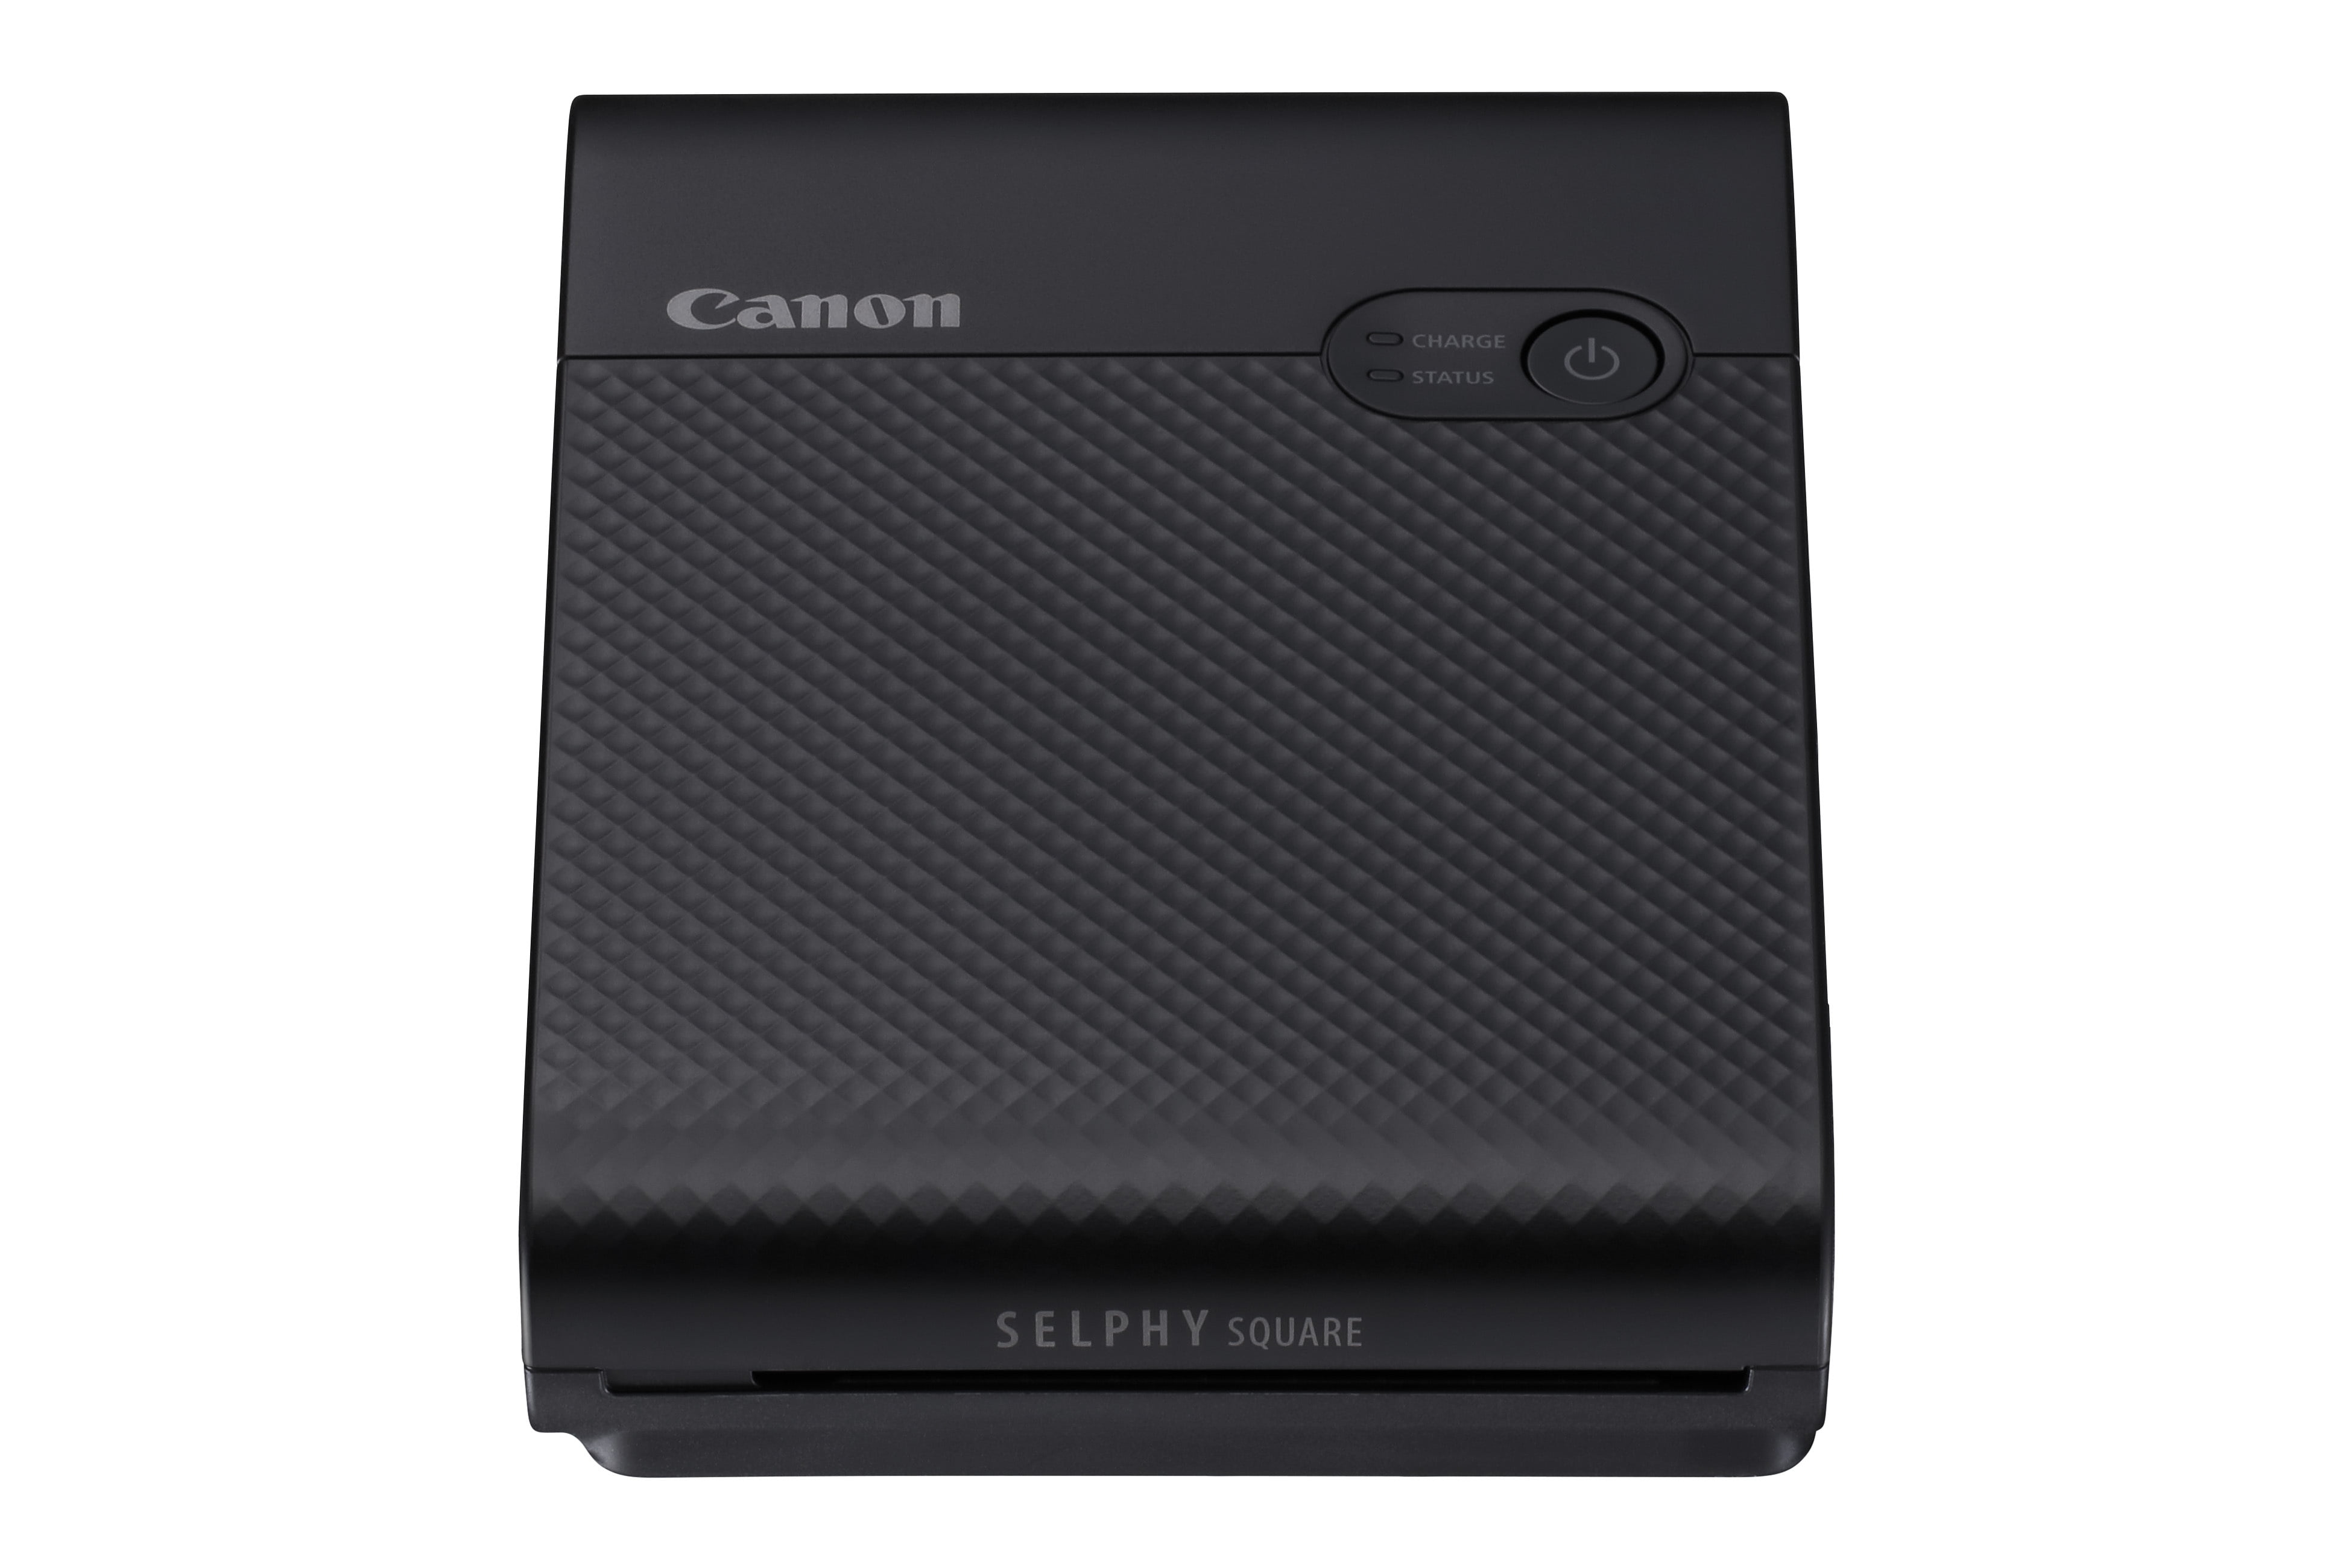 Canon launched SELPHY SQUARE QX10 Pocket Photo Printer - TGH